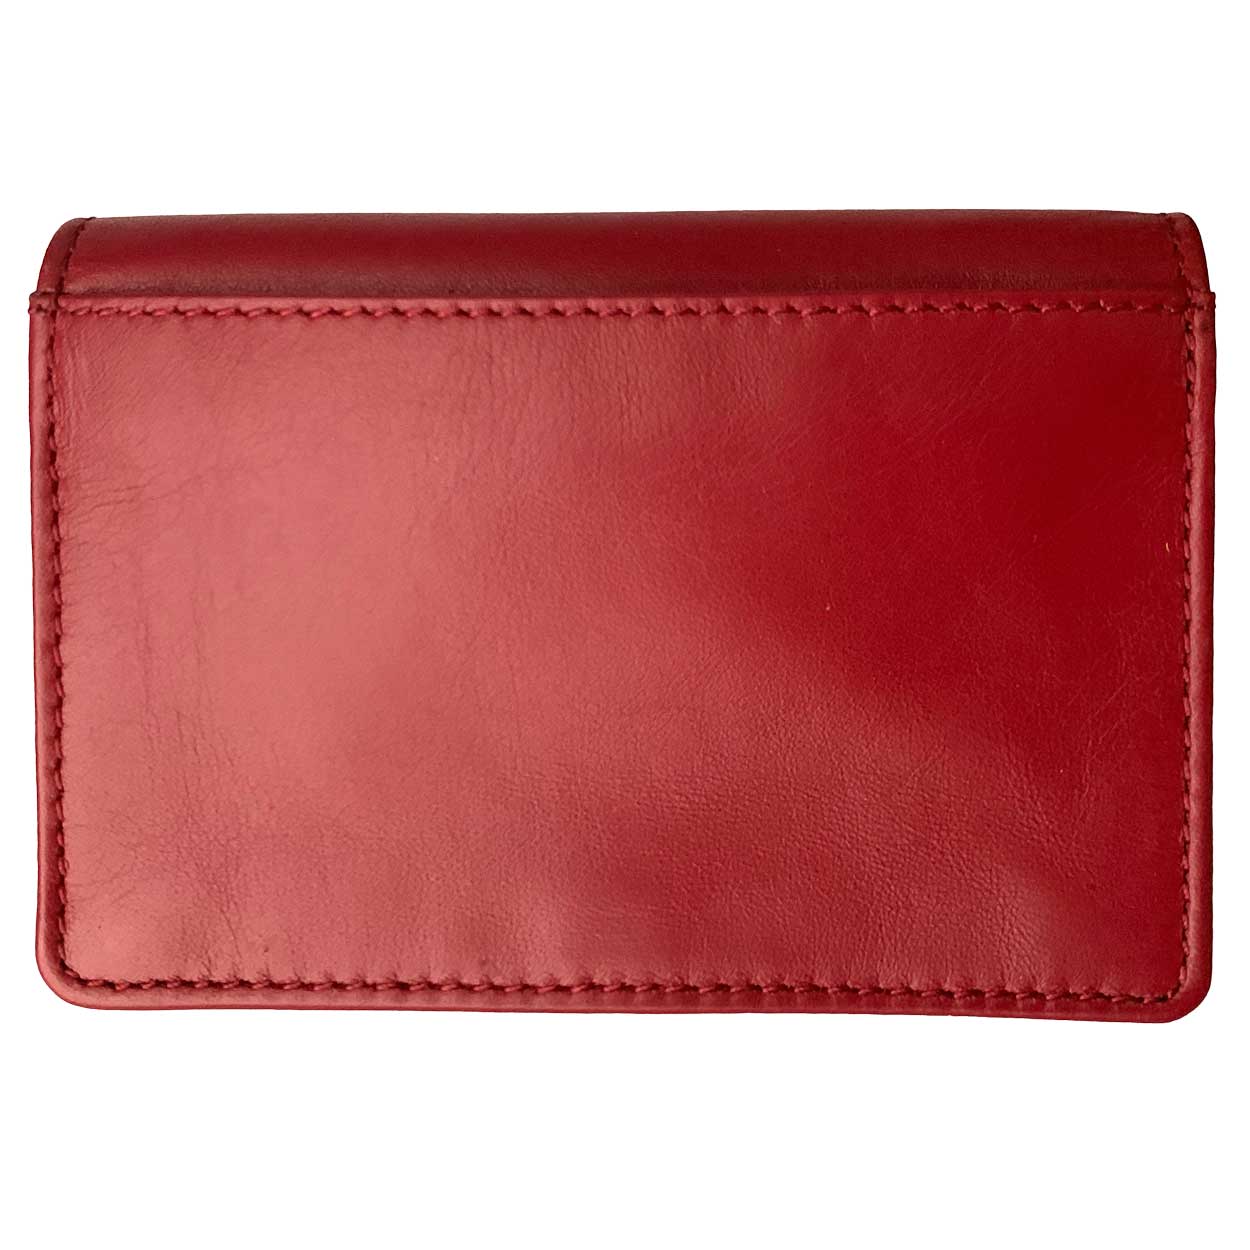 DiLoro Ultra Slim Mens Leather Credit Card Holder Wallet